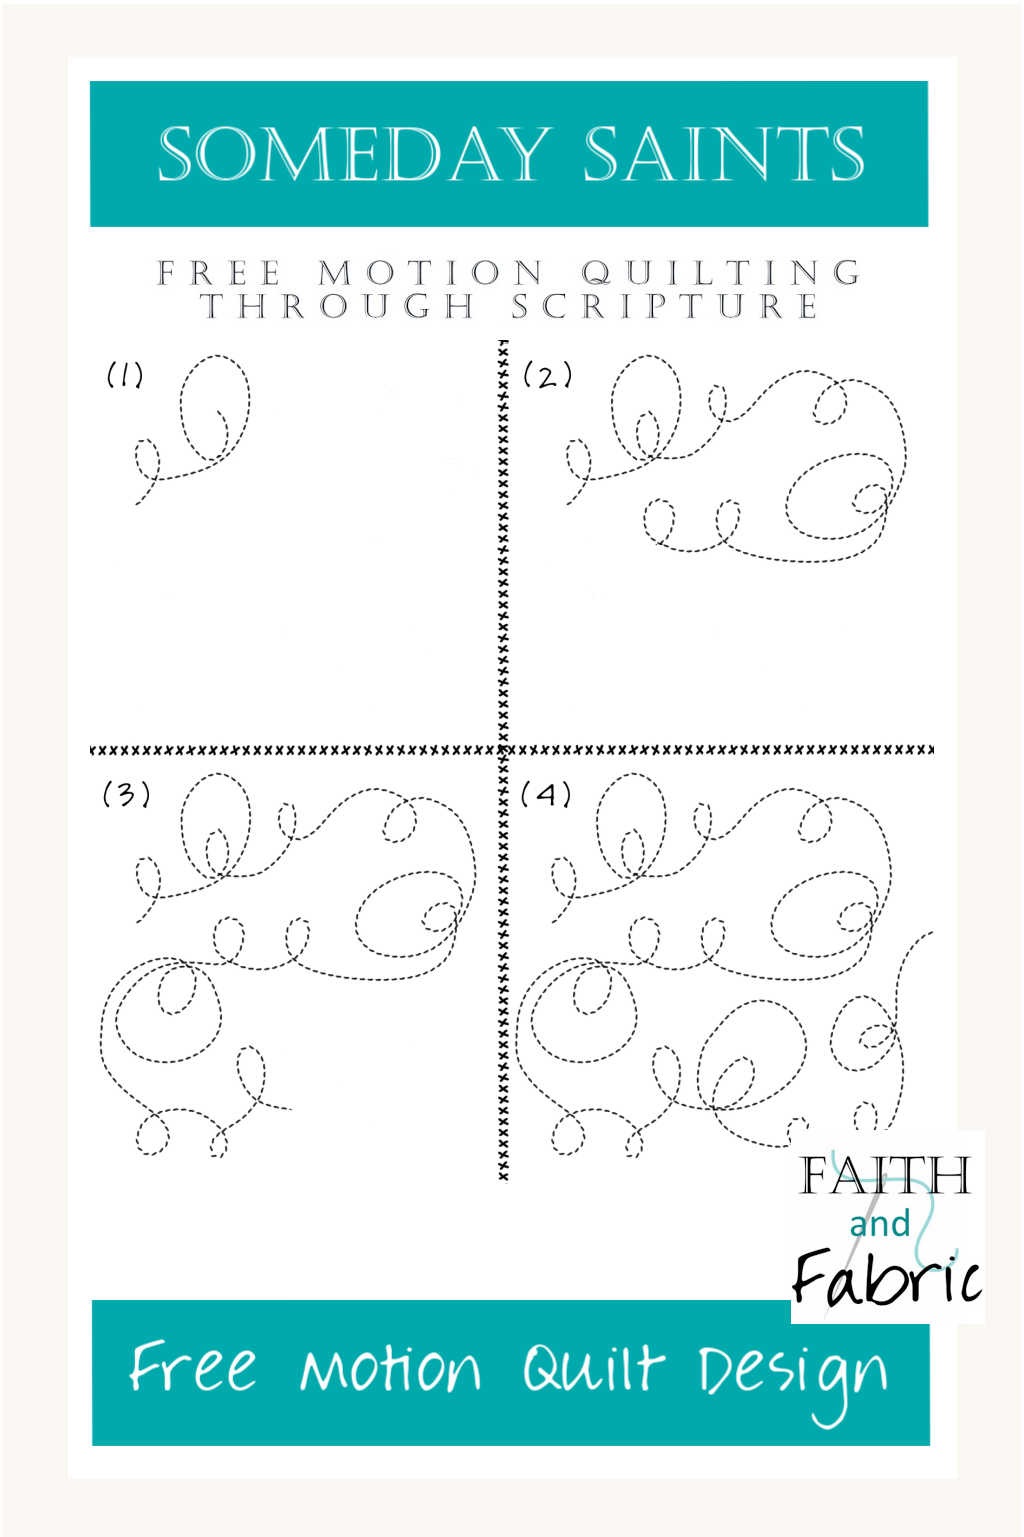 Practice your free motion quilting with this loop design! We are all called to be saints, and to be the best version of ourselves. Within this free motion quilt design, little saints - with their halos - appear mixed in alongside smaller loops, creating a visually interesting design that meanders through your quilt. This free motion quilt design is great for beginners and advanced quilters alike, and includes a video tutorial to walk you through creating this fmq design.